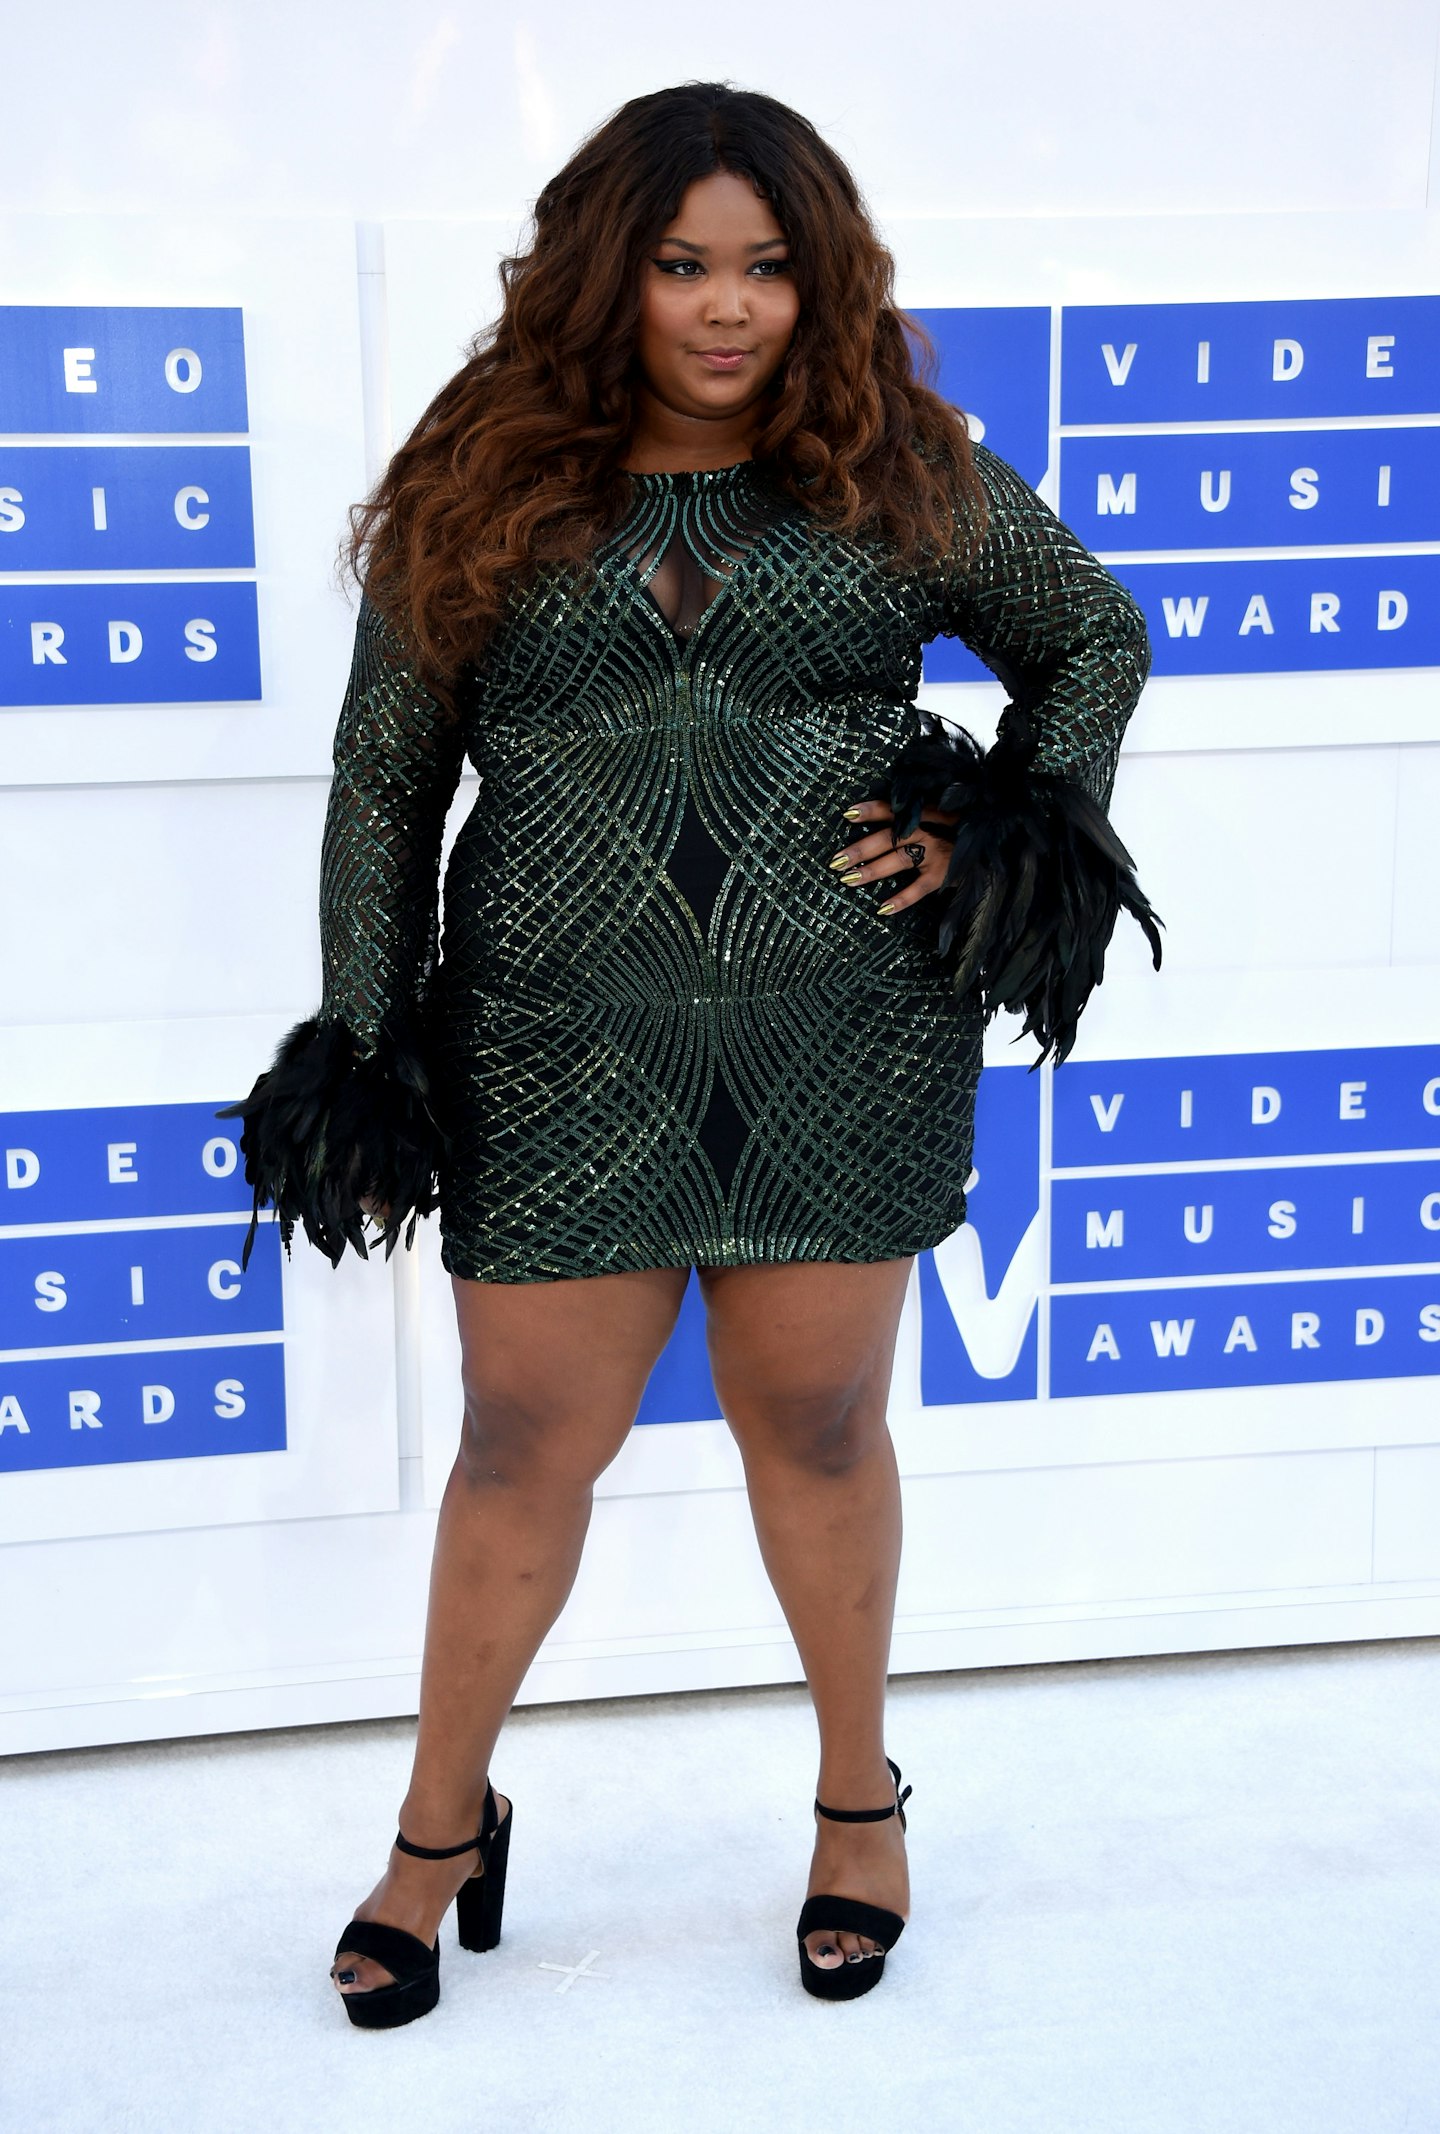 Lizzo Volunteers To Star In 'The Bodyguard' Remake Alongside Chris